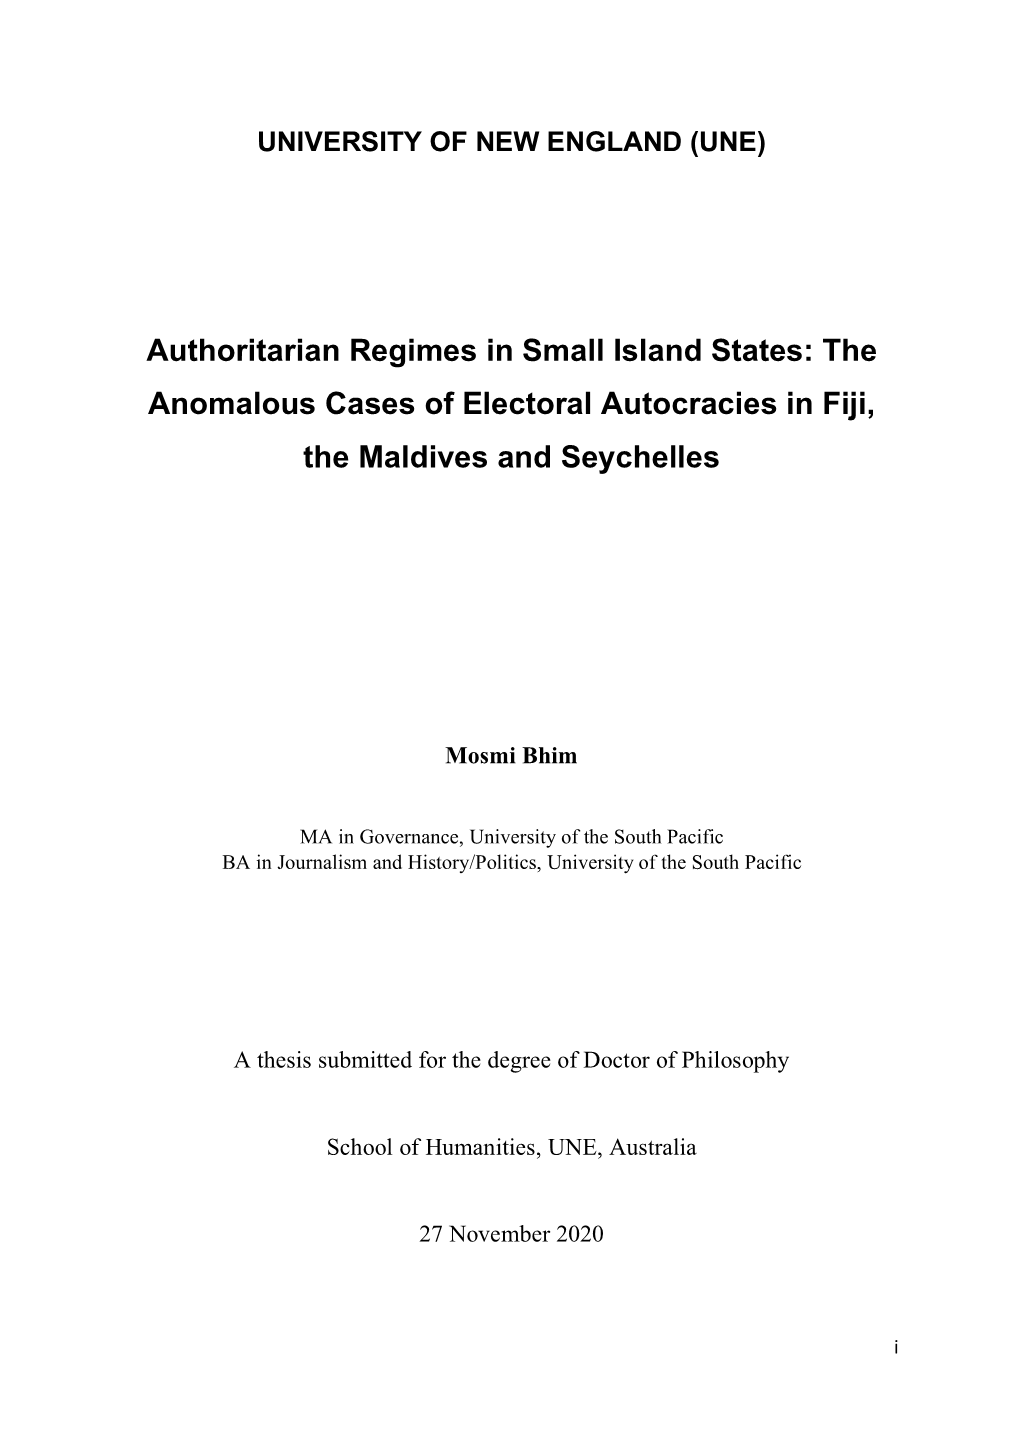 Authoritarian Regimes in Small Island States: the Anomalous Cases of Electoral Autocracies in Fiji, the Maldives and Seychelles